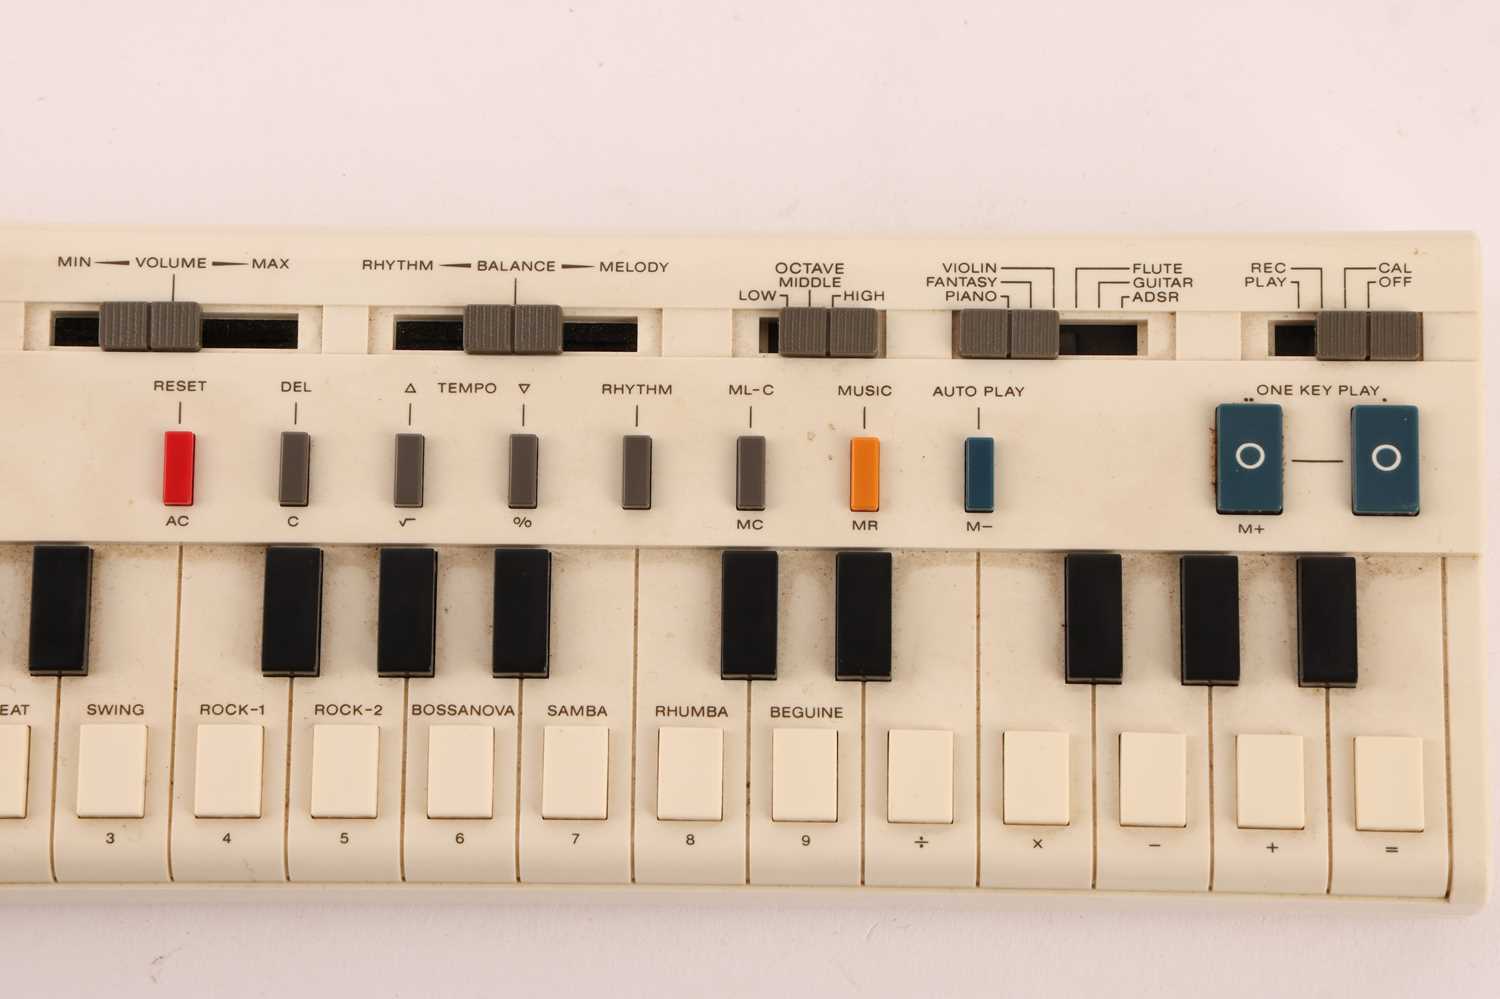 A Casio VL-Tone VL-1 Keyboard, with original carry pouch and operation manual, from the personal col - Image 7 of 9